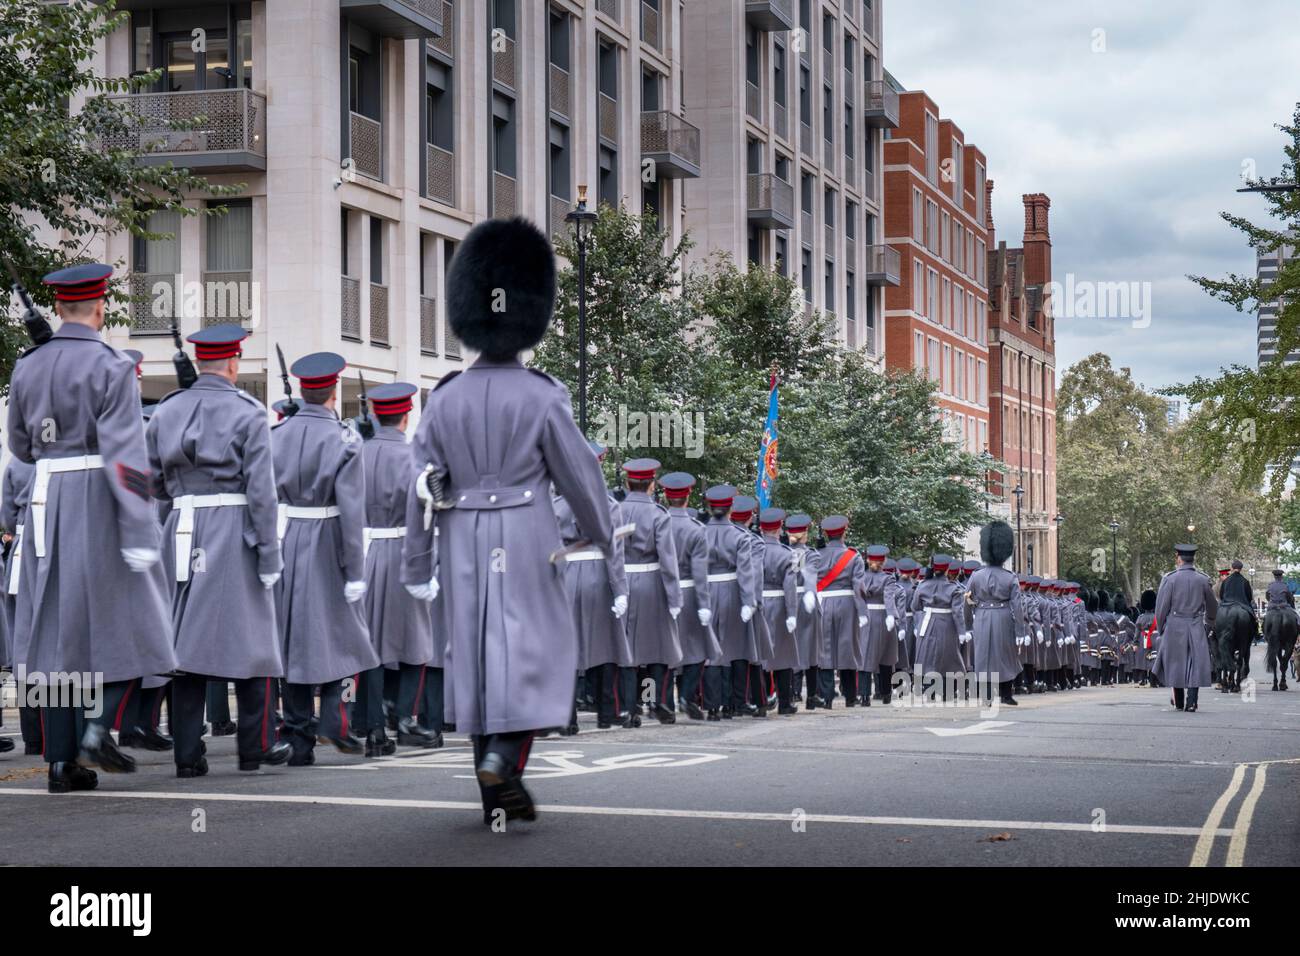 Soldiers on parade in Central London, Lord Mayor's Show 2021. Queen's Foot Guard regiments. Rear shot of troops marching on city street Stock Photo